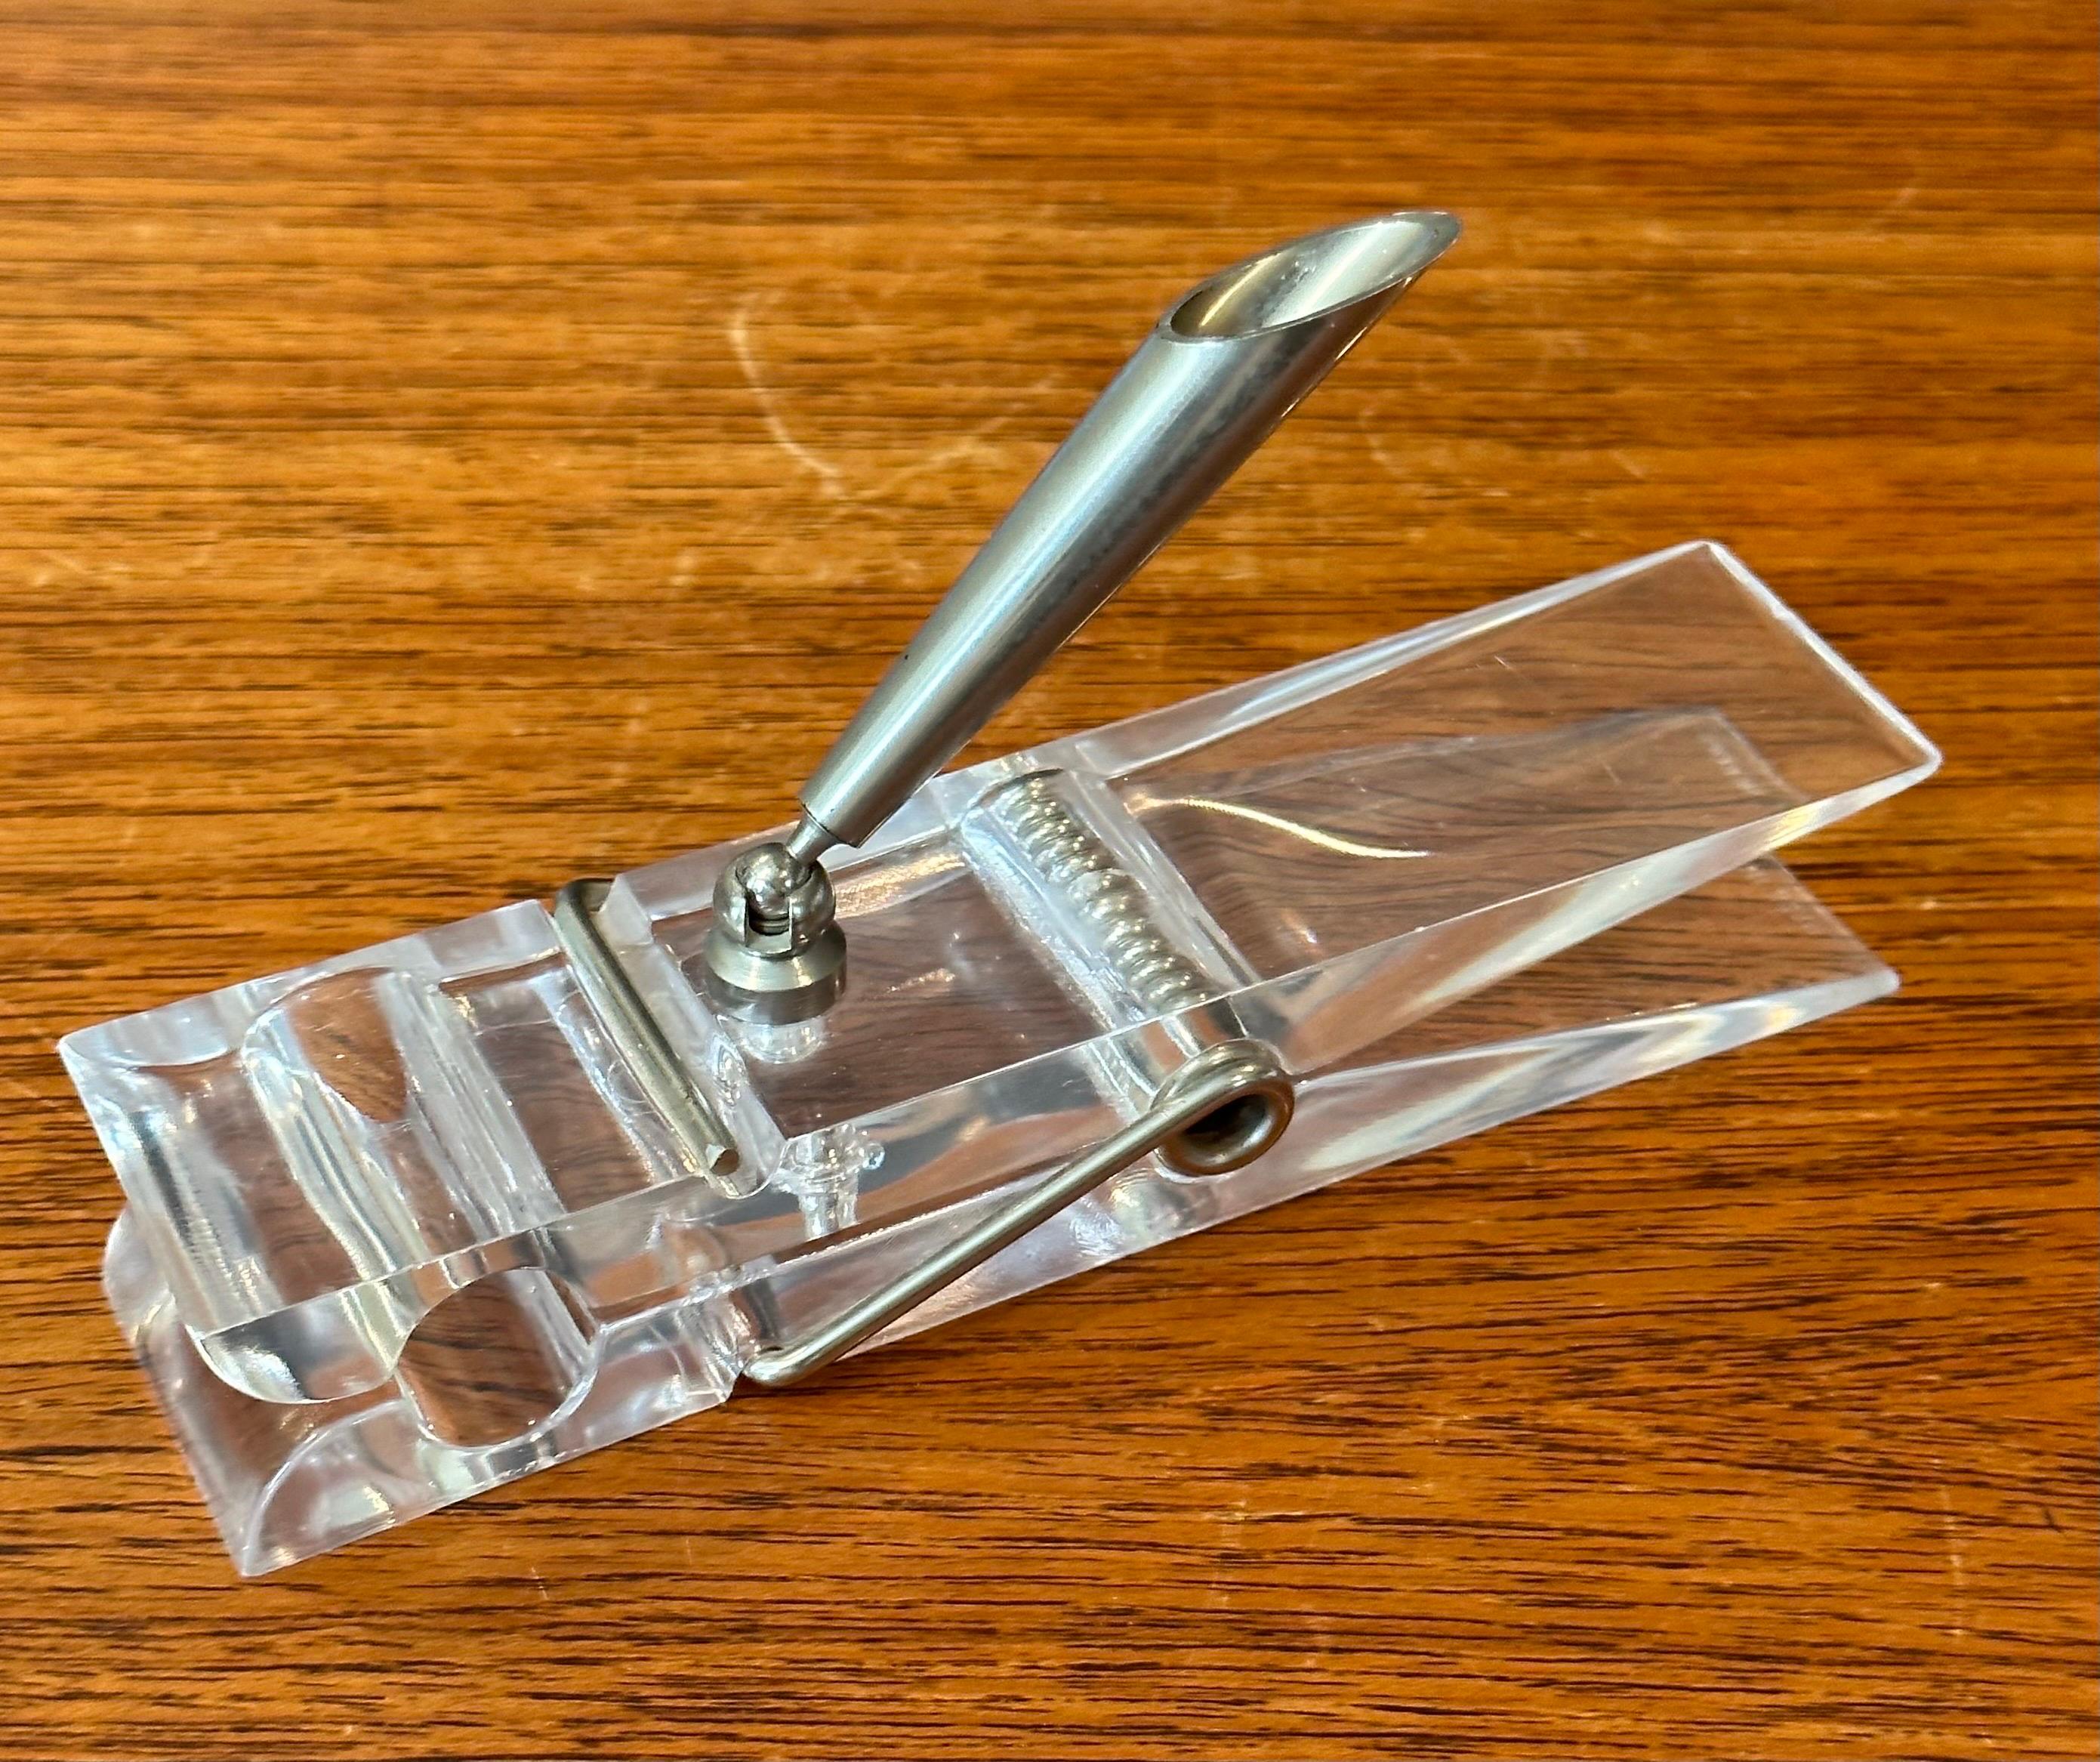 Chrome Oversized Lucite Clothespin Paperweight / Pen Holder / Desk Accessory For Sale